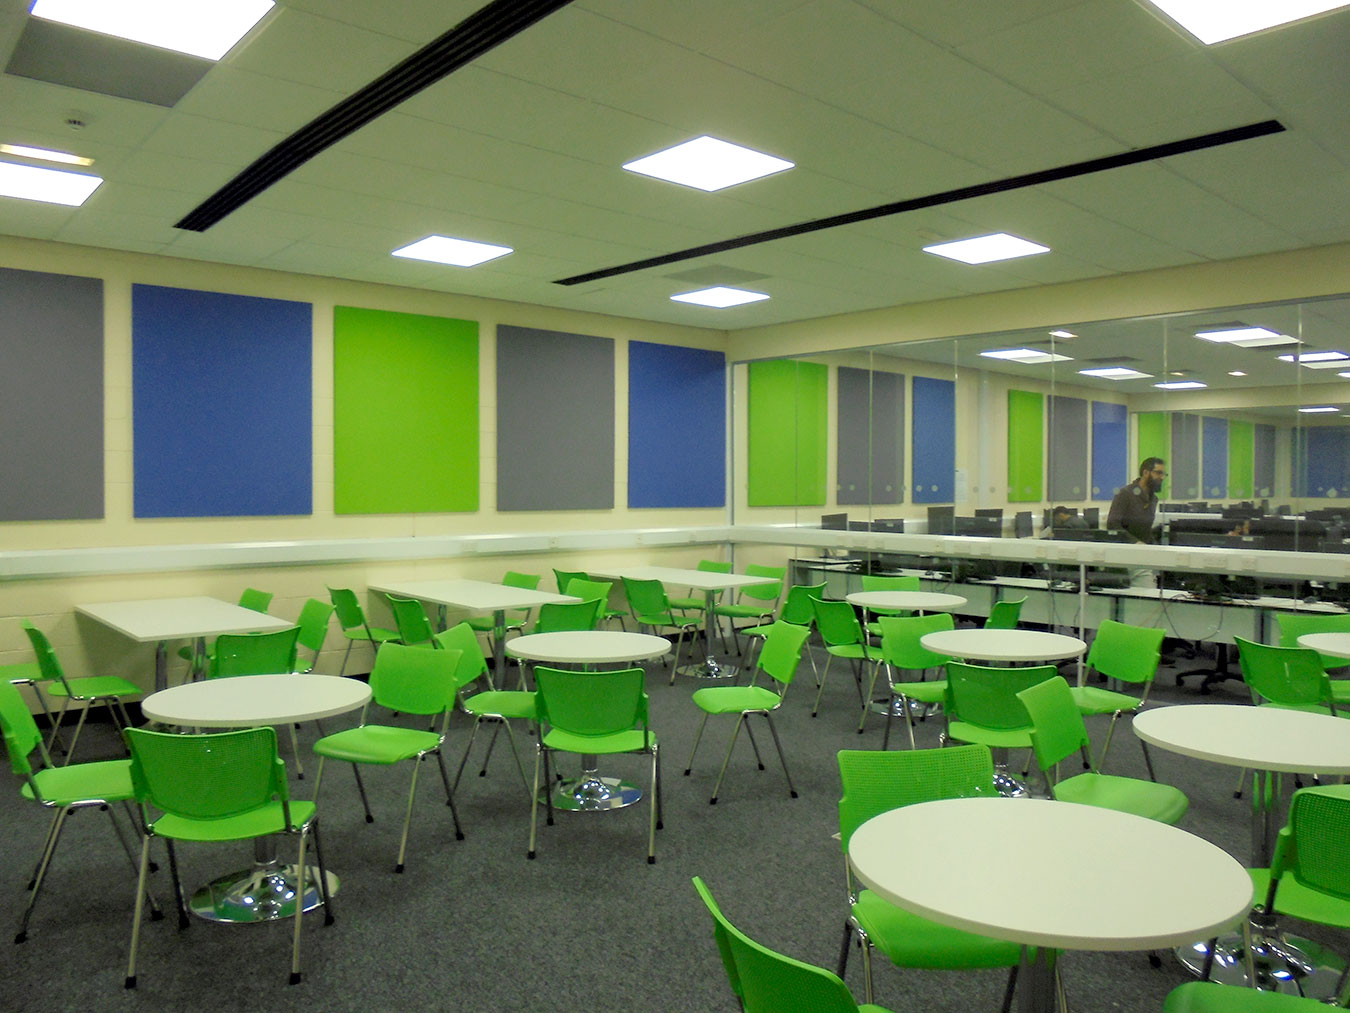 kilburn-building-university-of-manchester-interior-by-armex-systems-3